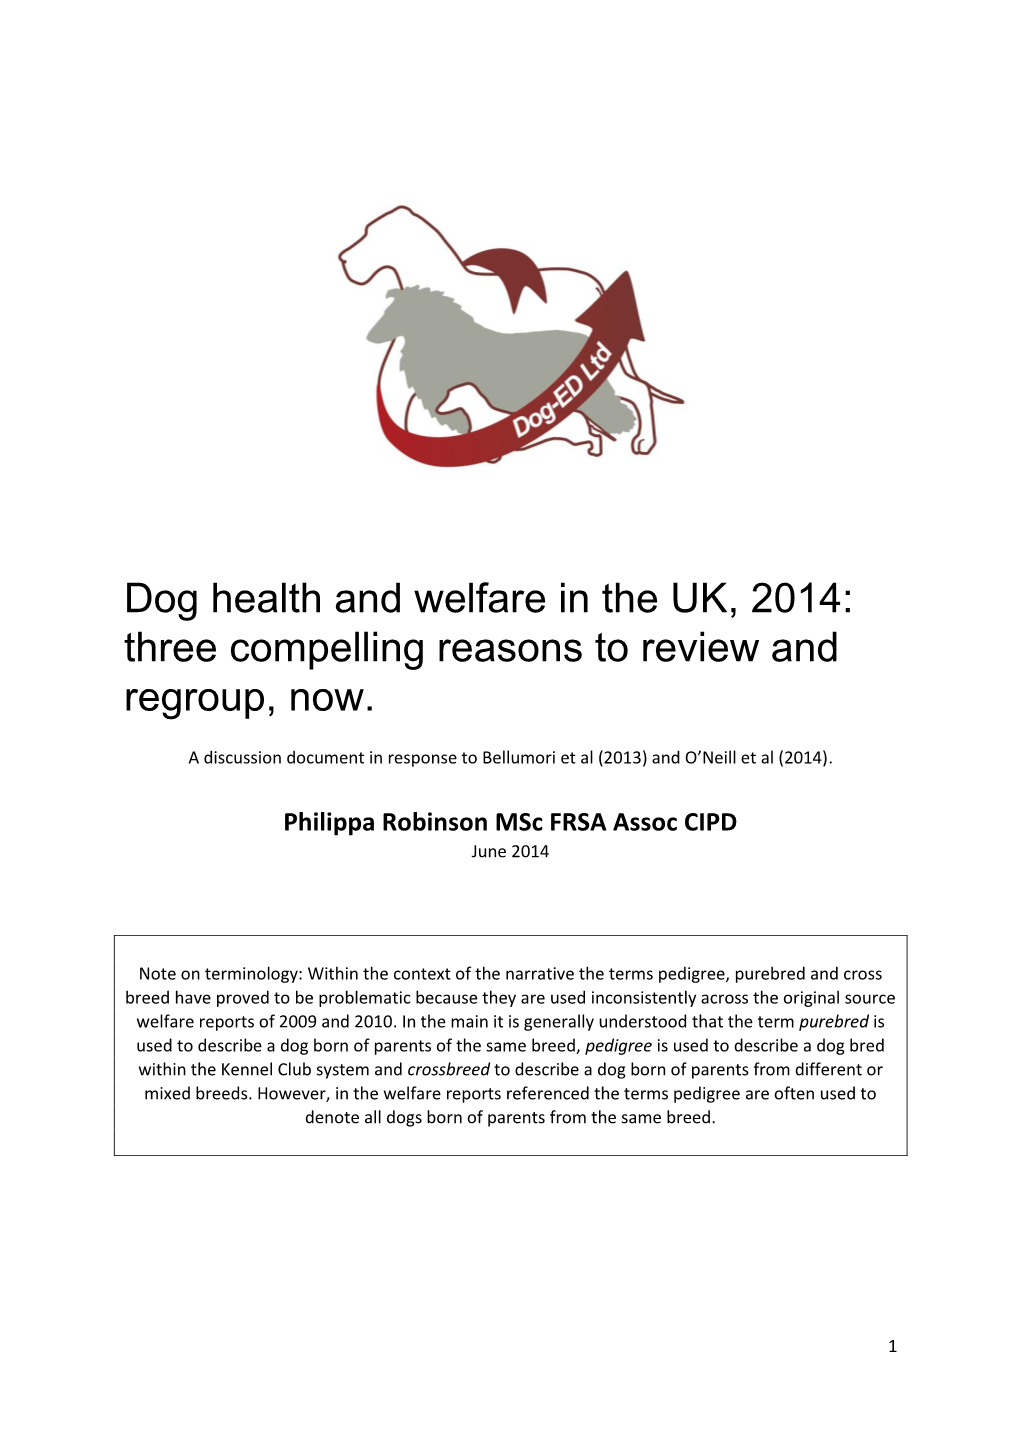 Dog Health and Welfare in the UK, 2014: Three Compelling Reasons to Review and Regroup, Now